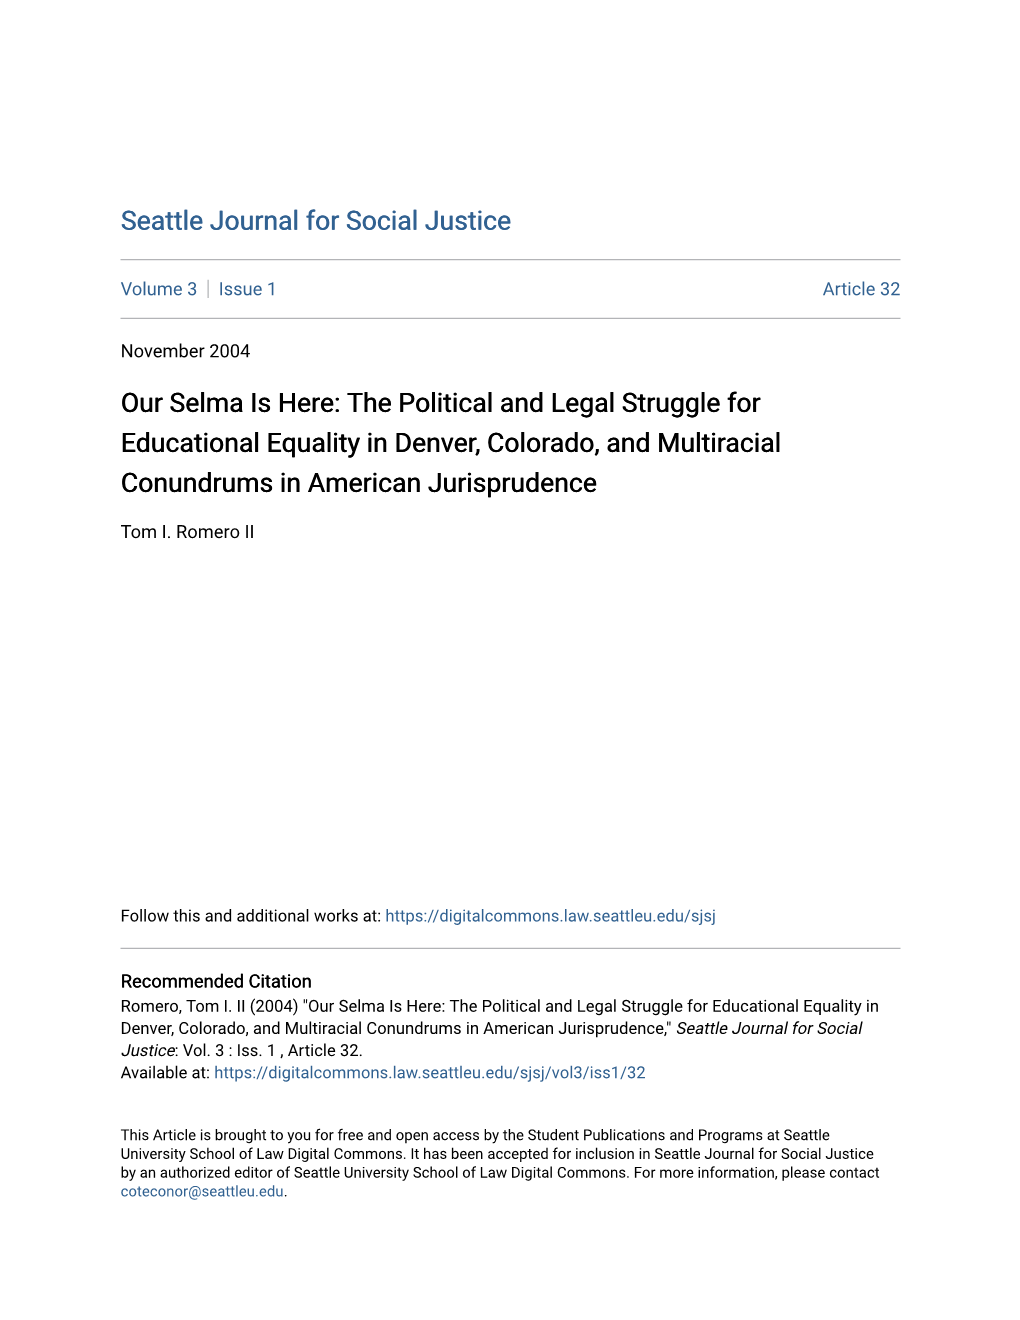 The Political and Legal Struggle for Educational Equality in Denver, Colorado, and Multiracial Conundrums in American Jurisprudence